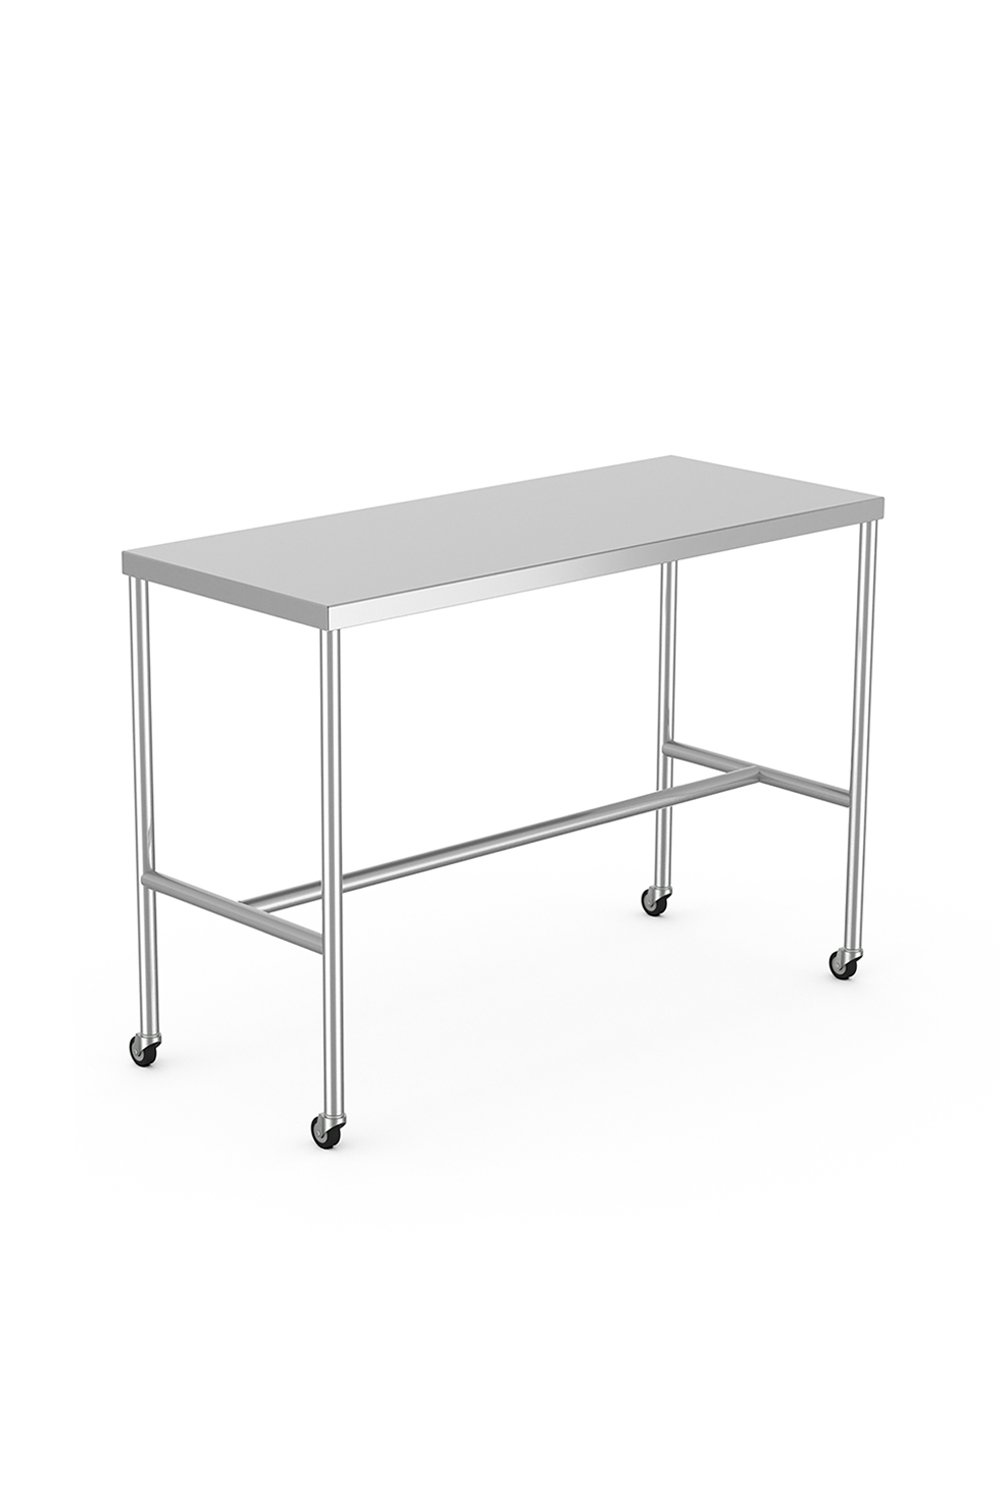 Stainless Steel Table Stainless Solutions Macmedical 20"D x 48"W x 34"H H-Brace 